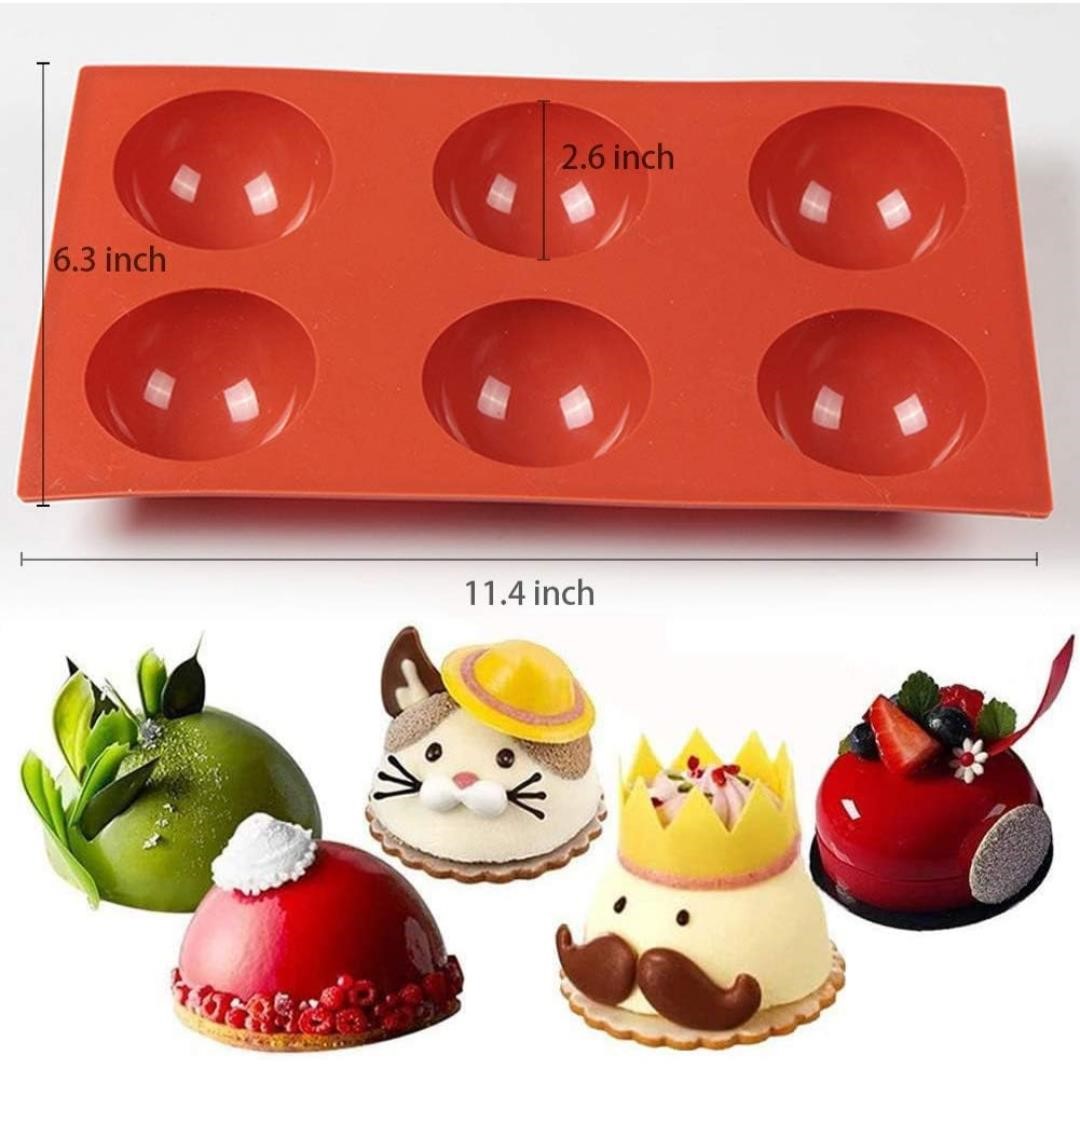 Large Semi Sphere Silicone Mold for BAKING 4 Pcs